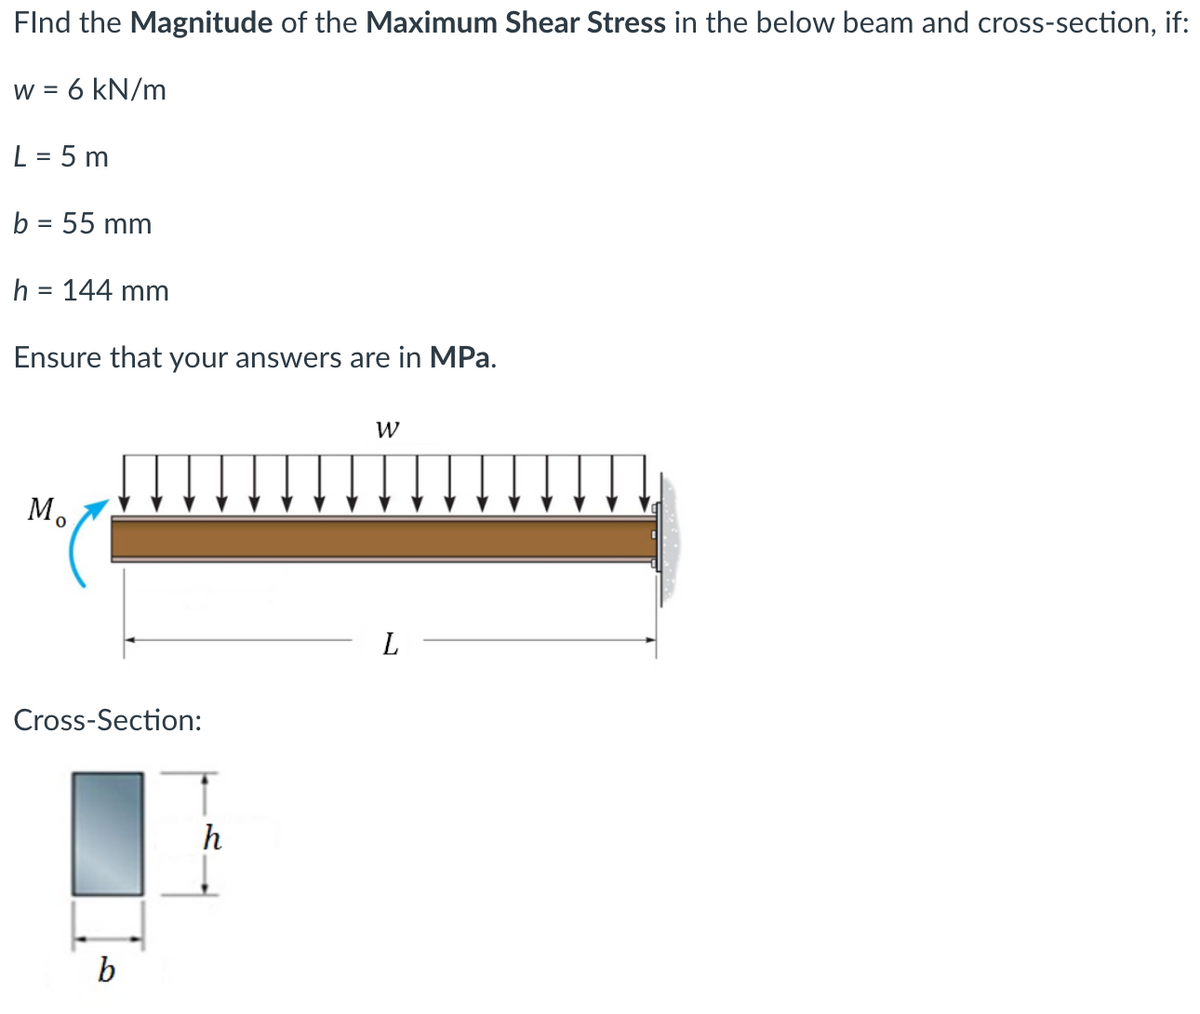 Find the Magnitude of the Maximum Shear Stress in the below beam and cross-section, if:
W =
= 6 kN/m
L = 5 m
b = 55 mm
h = 144 mm
Ensure that your answers are in MPa.
Mo
W
Cross-Section:
L
b
h